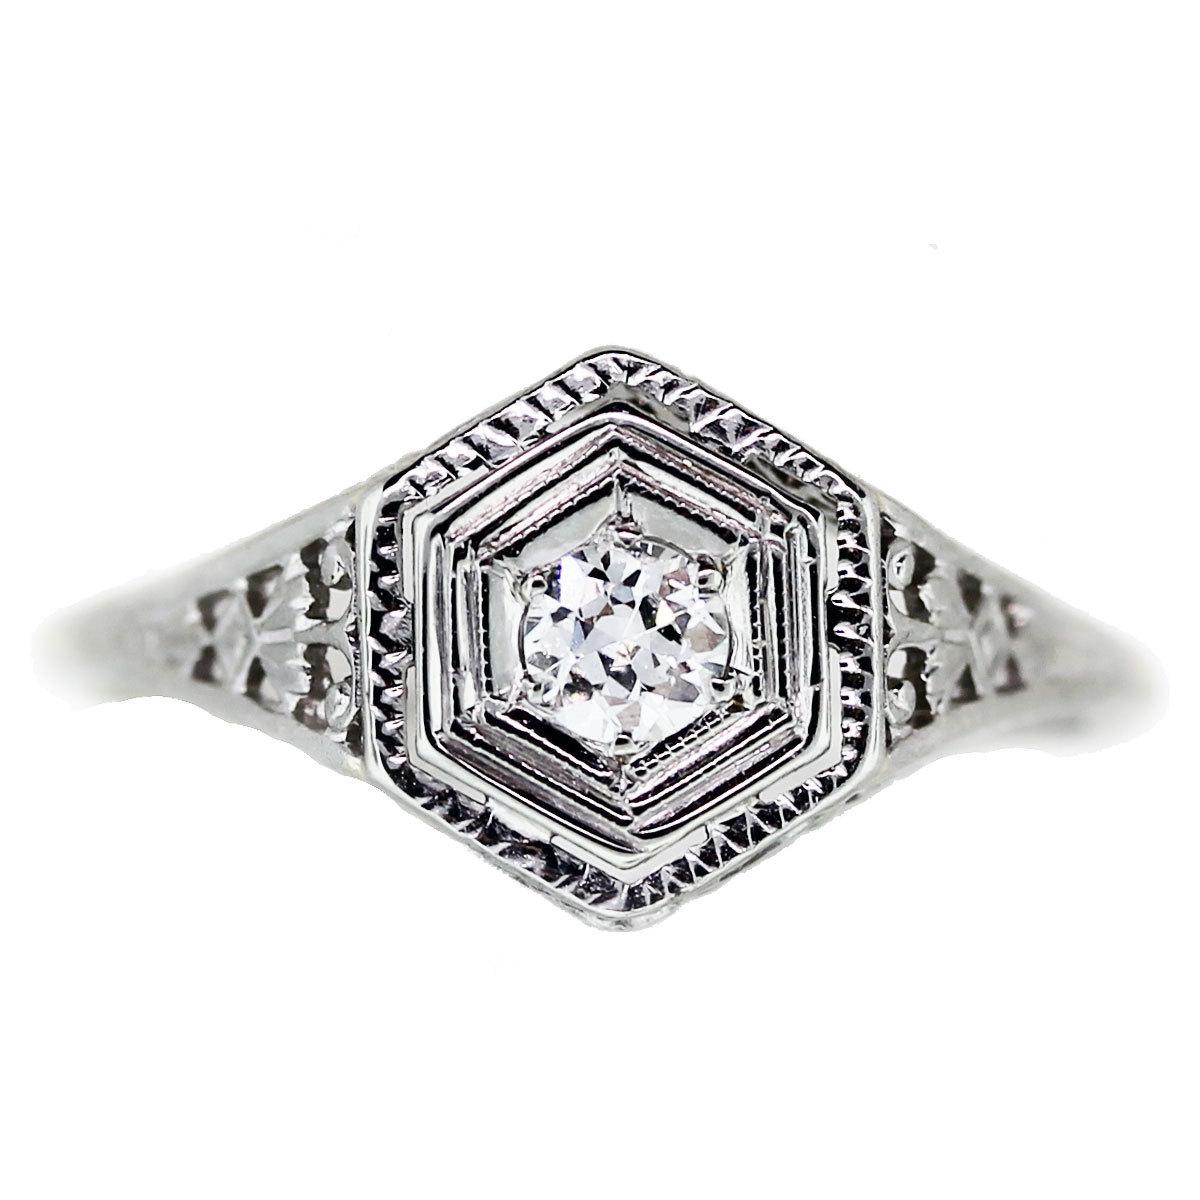 Engagement Ring Eye Candy: Engagement Rings Under 1000 Dollars